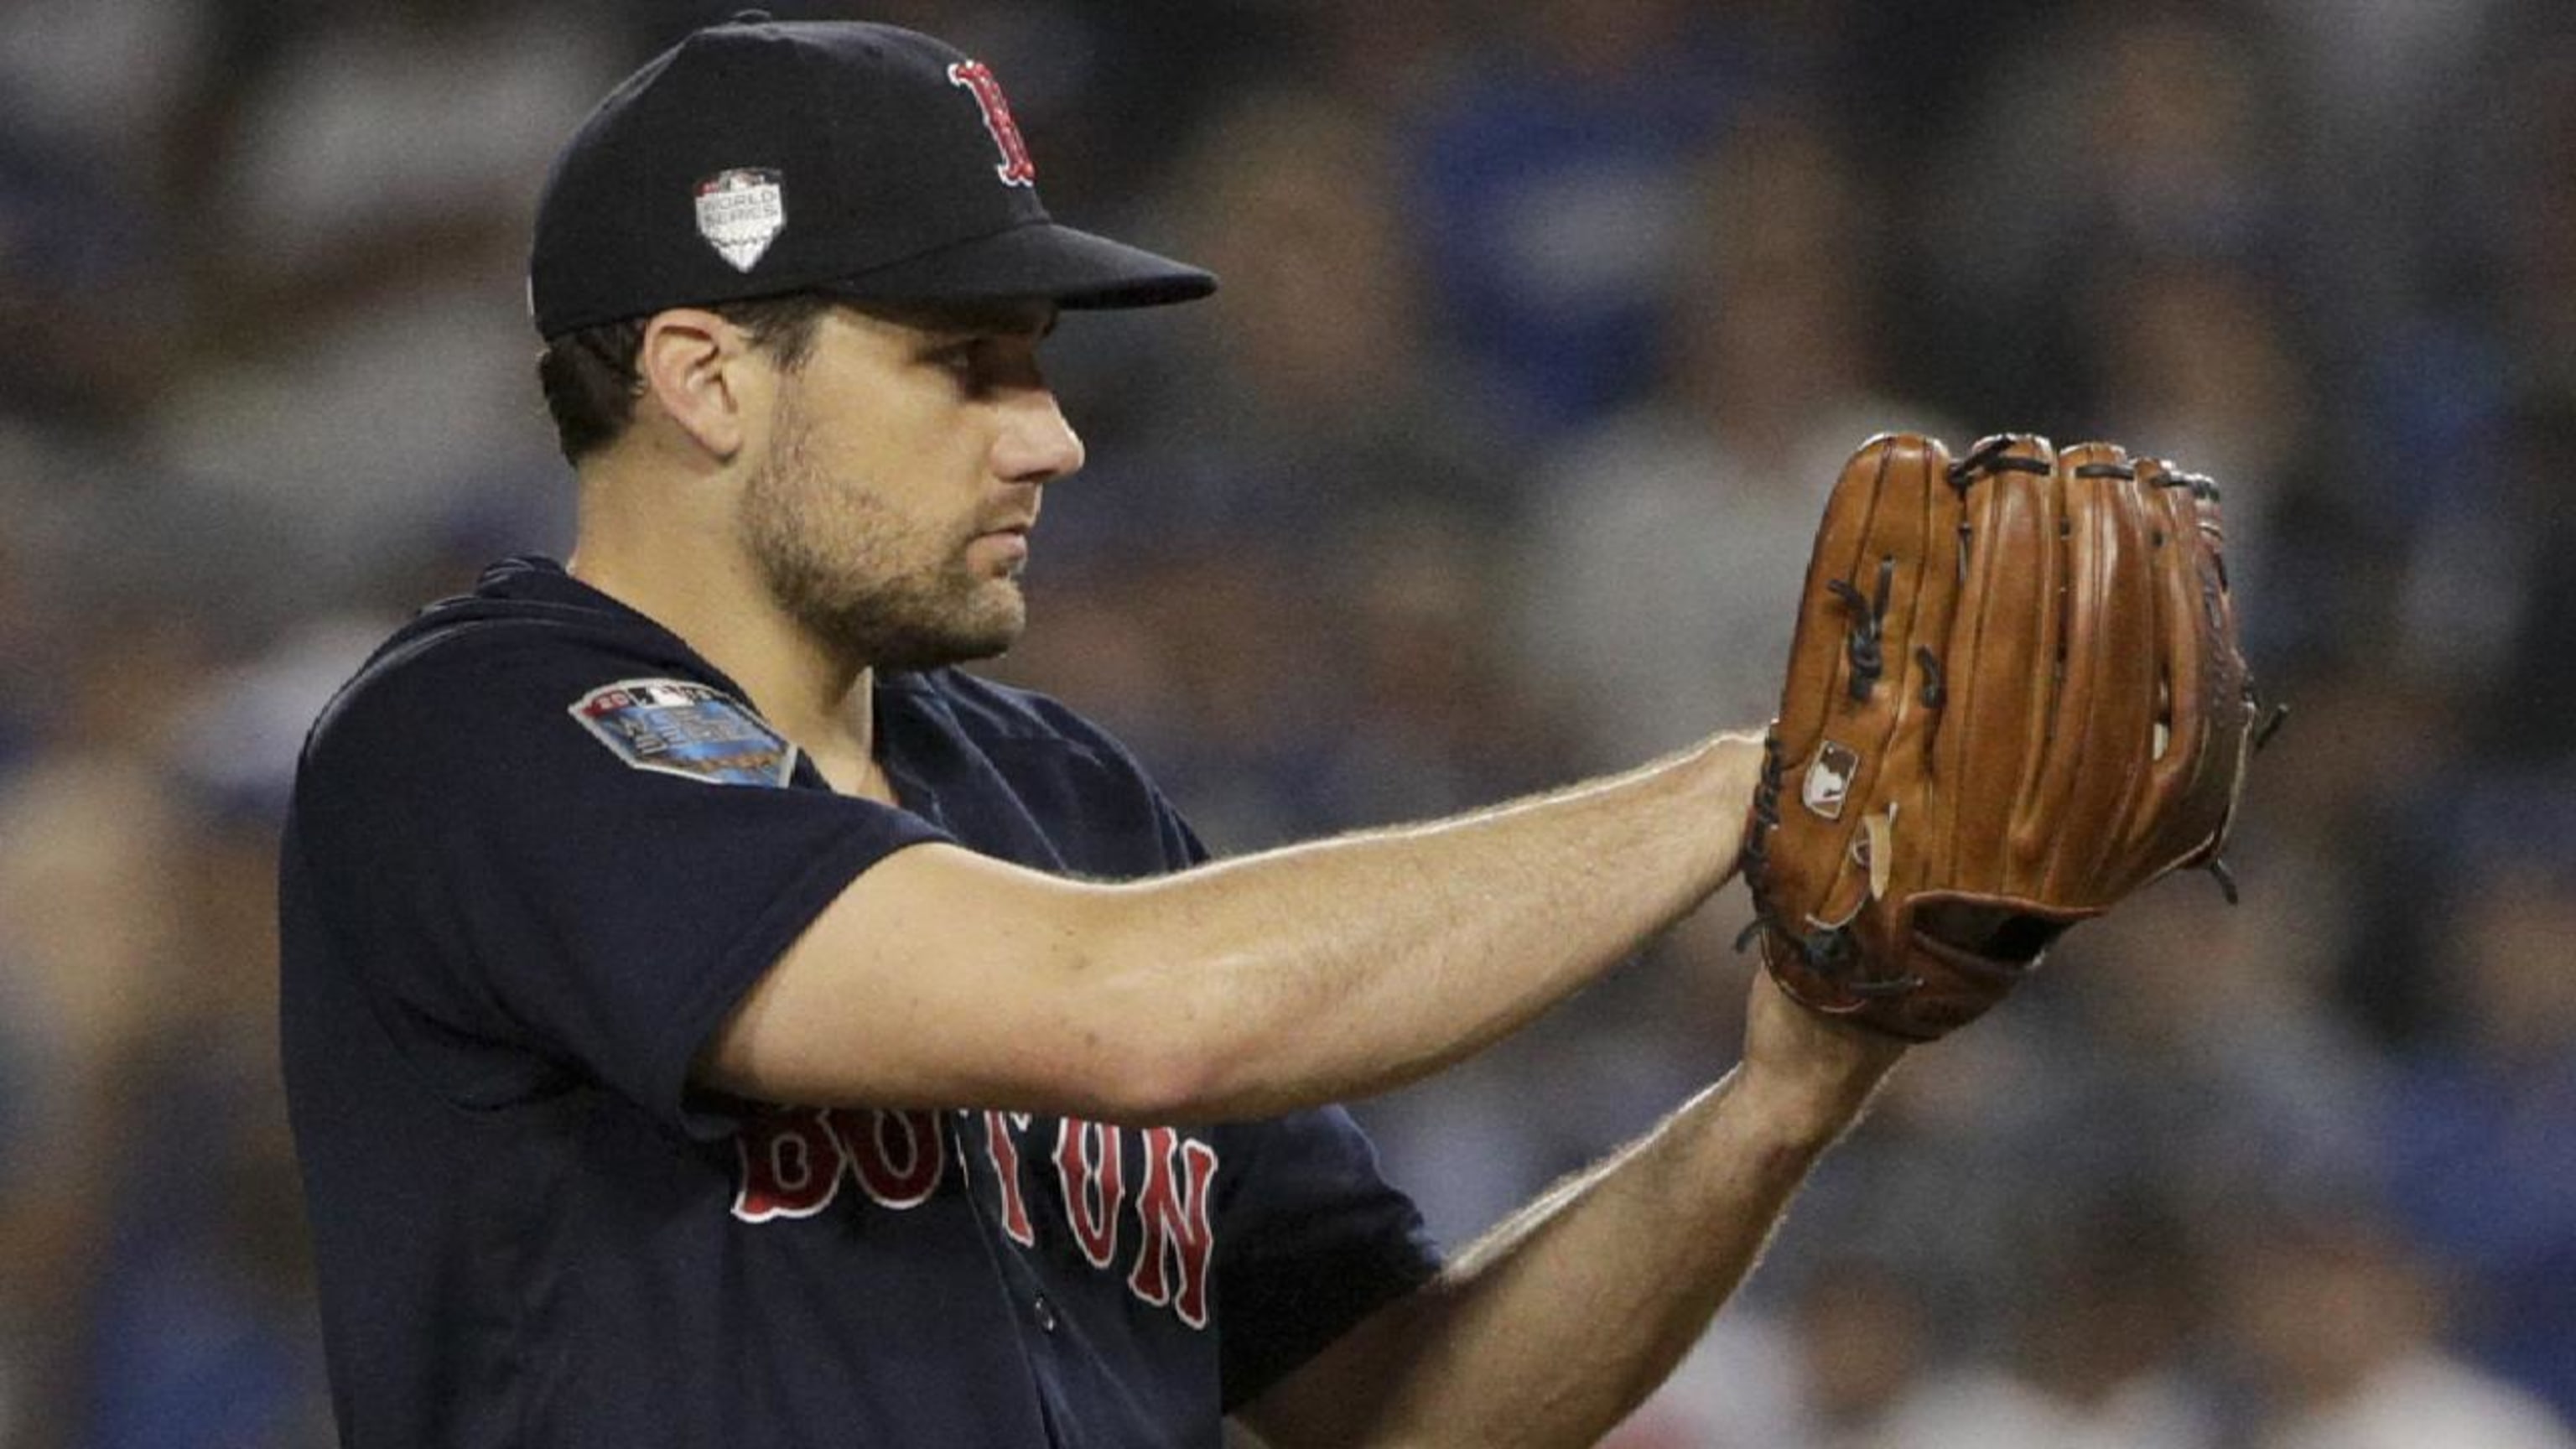 Boston Red Sox starter Nathan Eovaldi the third pitcher ever to